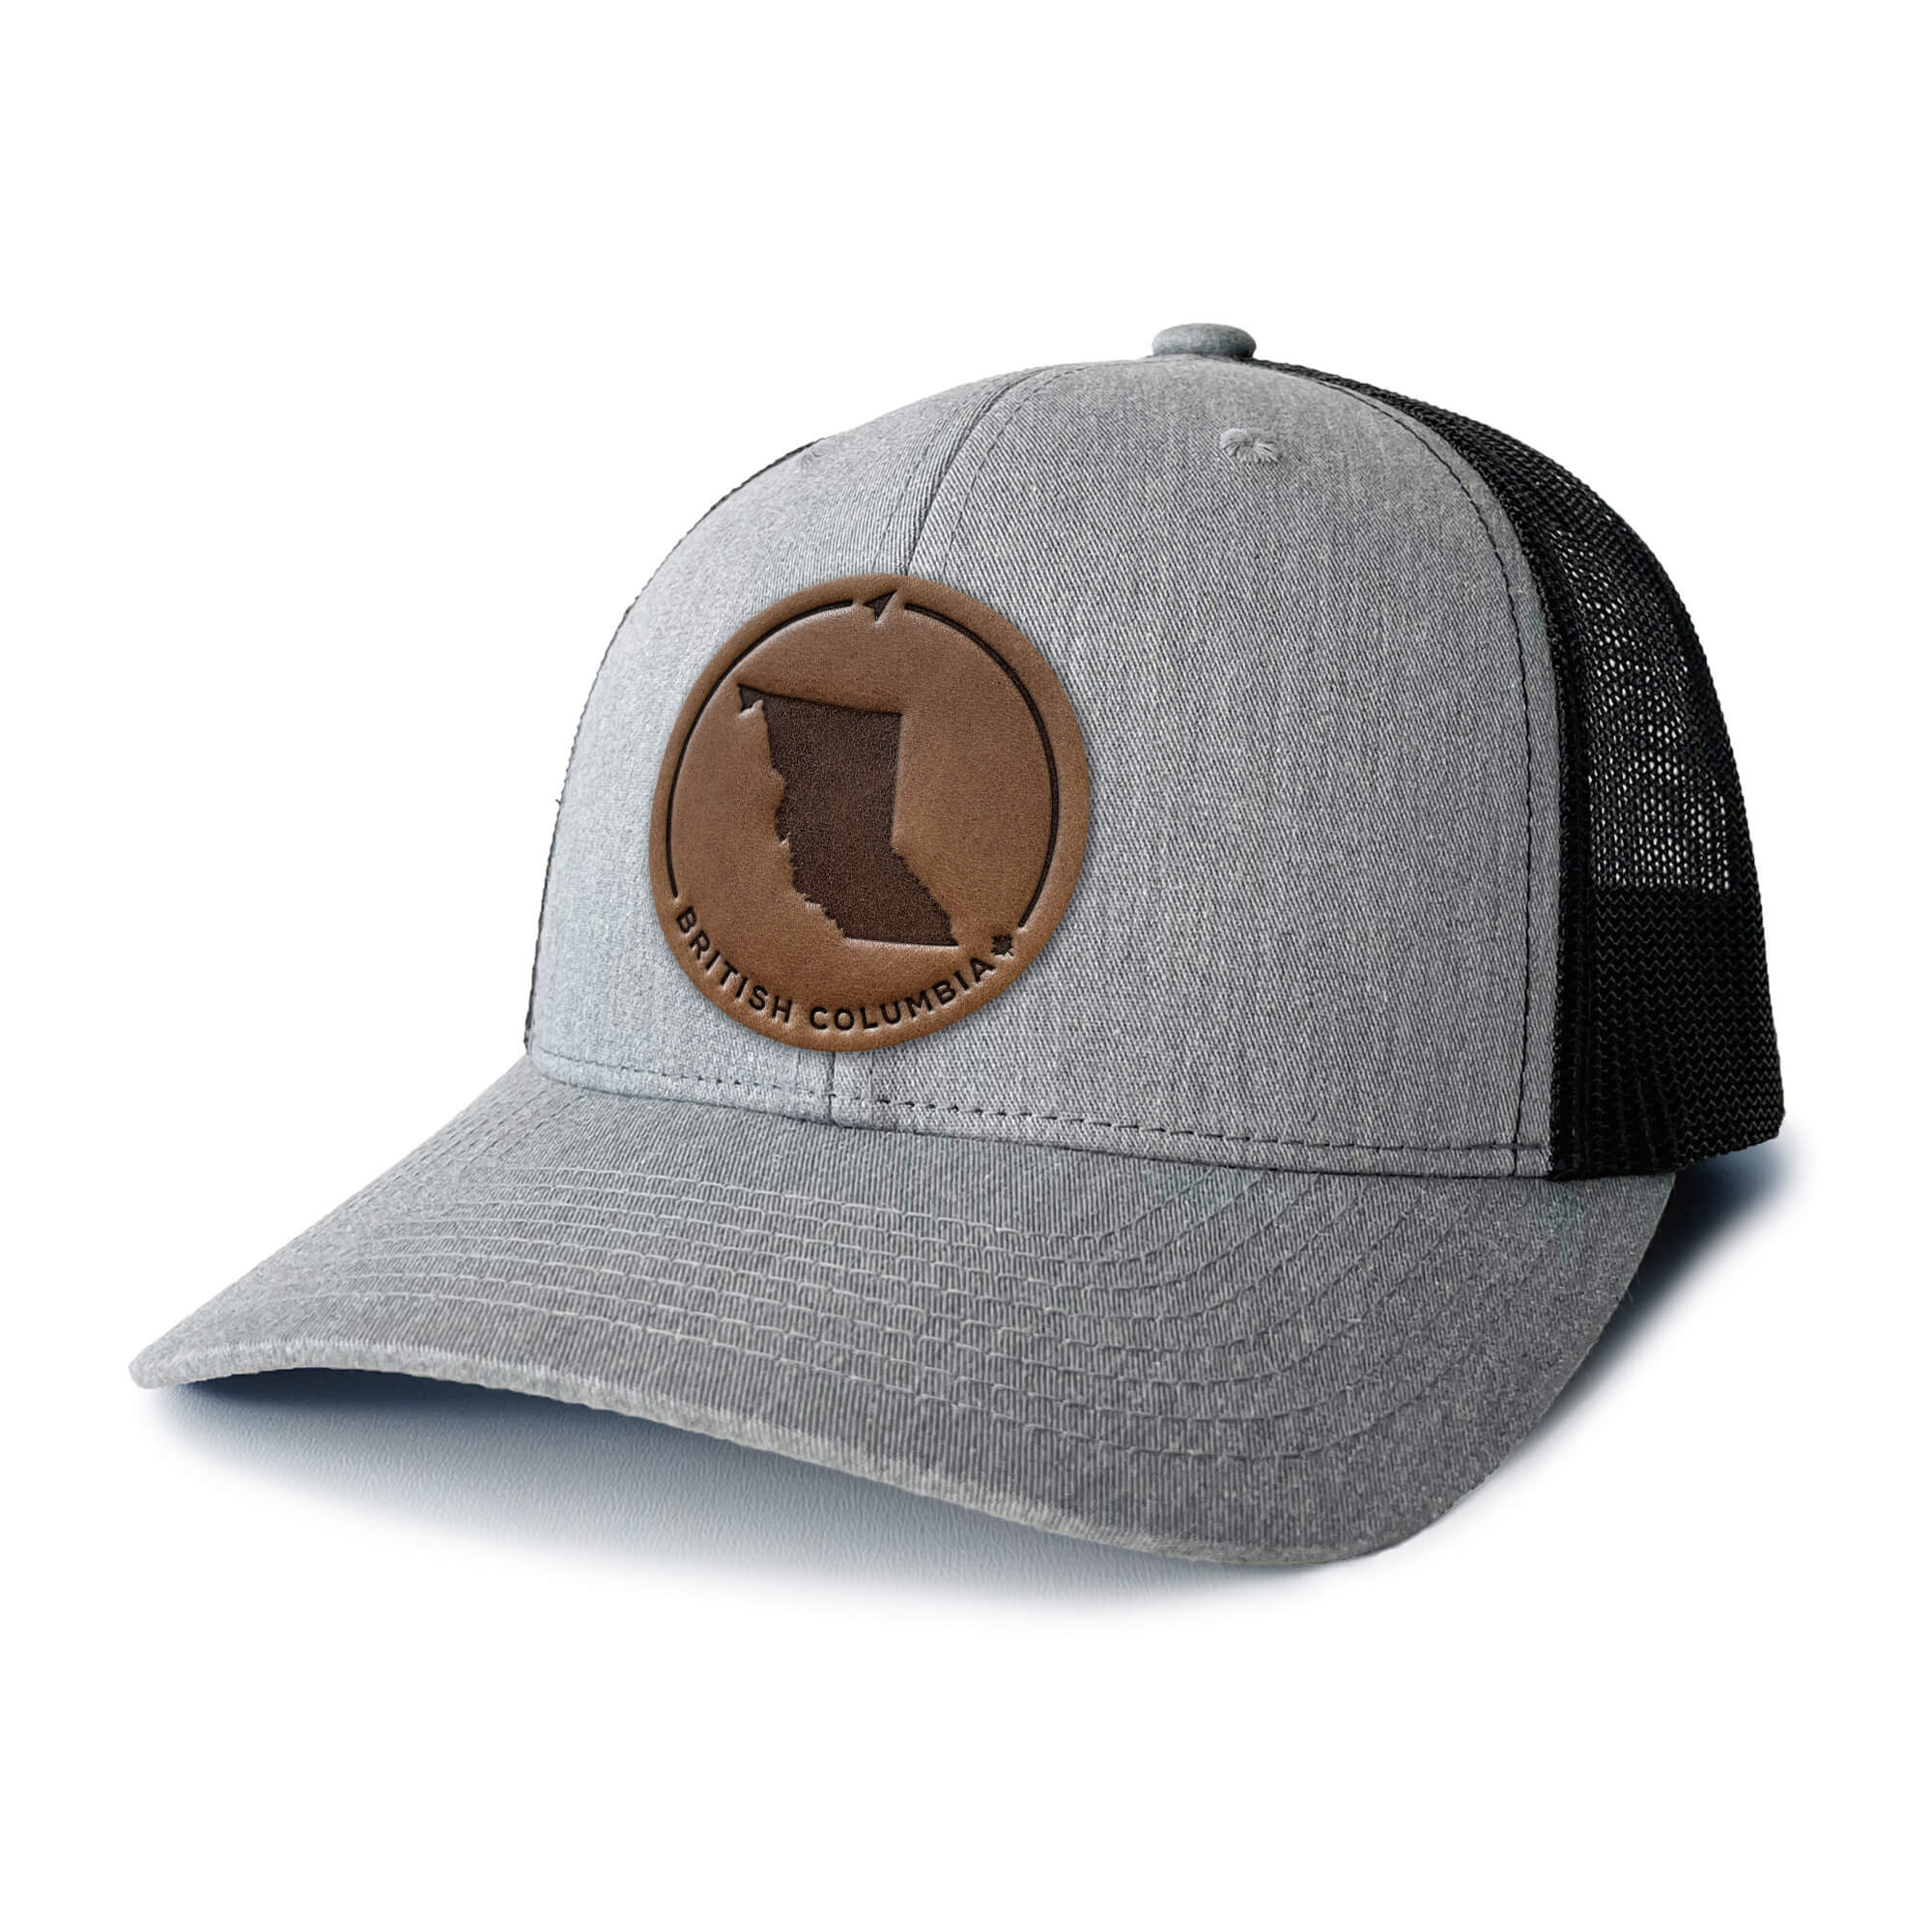 Heather Grey trucker hat with full-grain leather patch of British Columbia | BLACK-002-004, CHARC-002-004, NAVY-002-004, HGREY-002-004, MOSS-002-004, BROWN-002-004